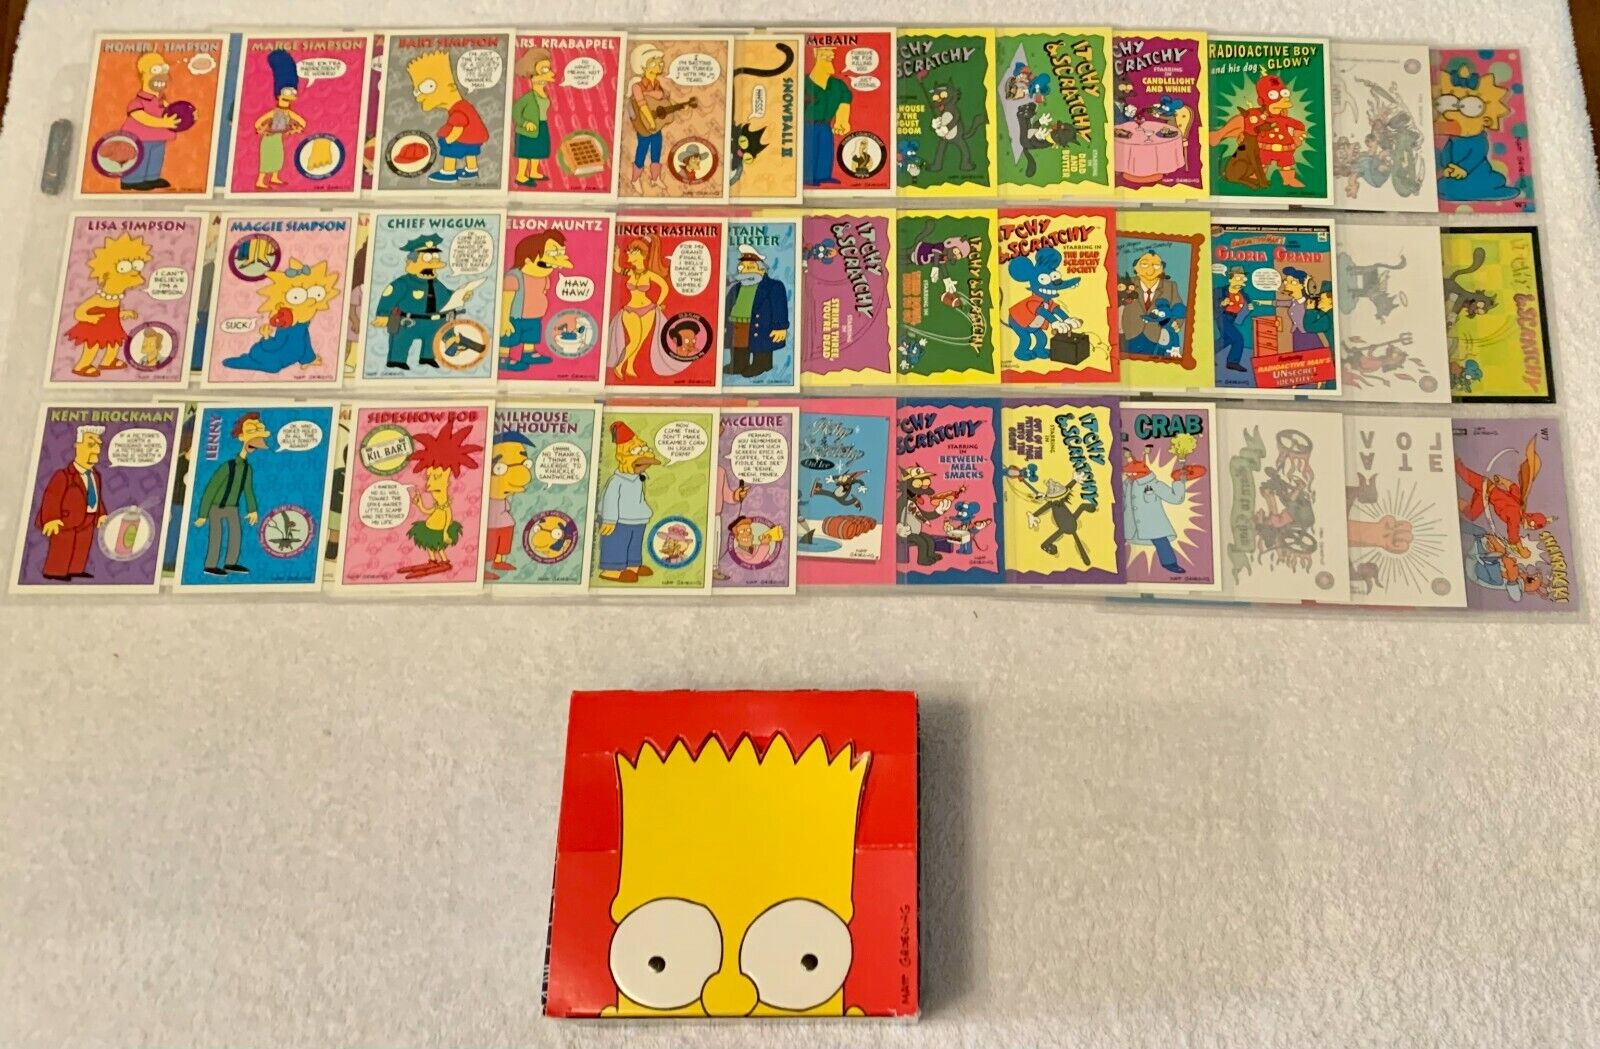 THE SIMPSONS TRADING CARD SET - 99 CARDS - 5 COMPLETE SUB-SETS - 1993 - SKYBOX